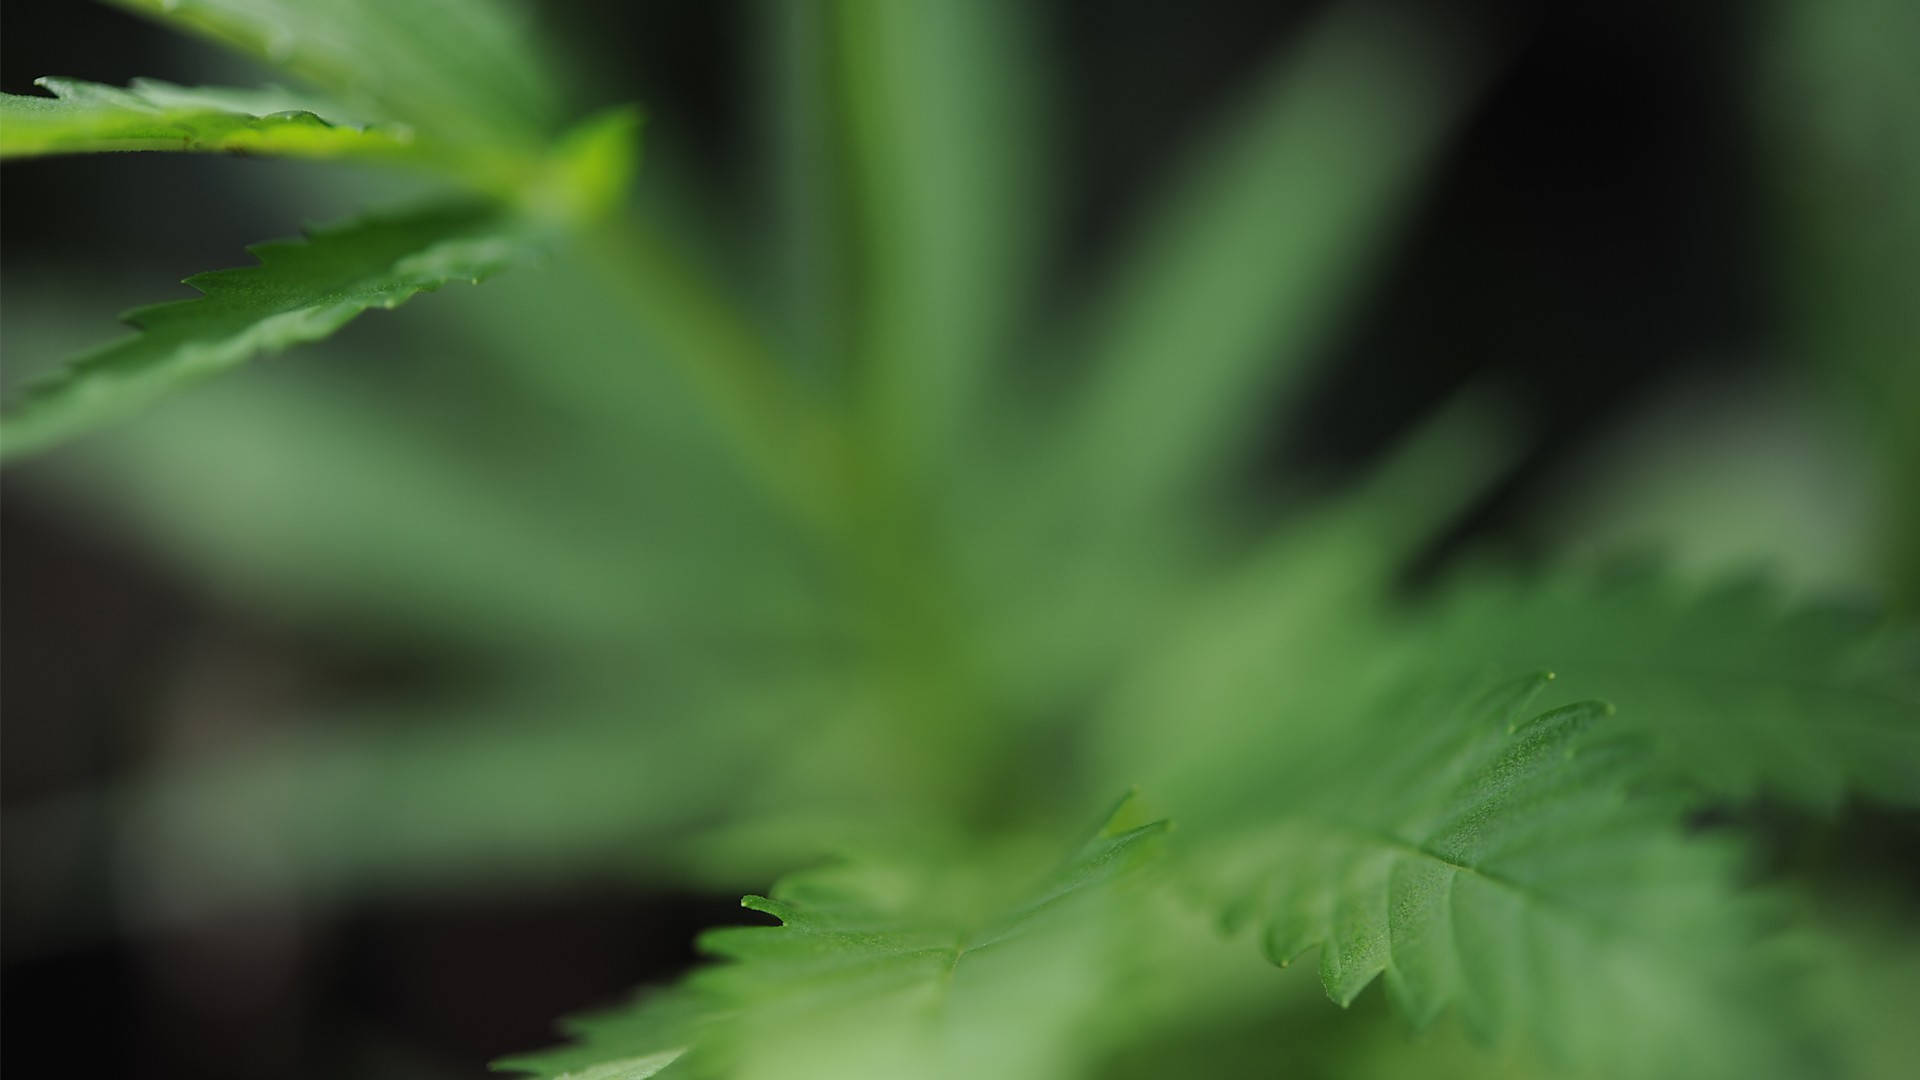 420 Weed Out Of Focus Background